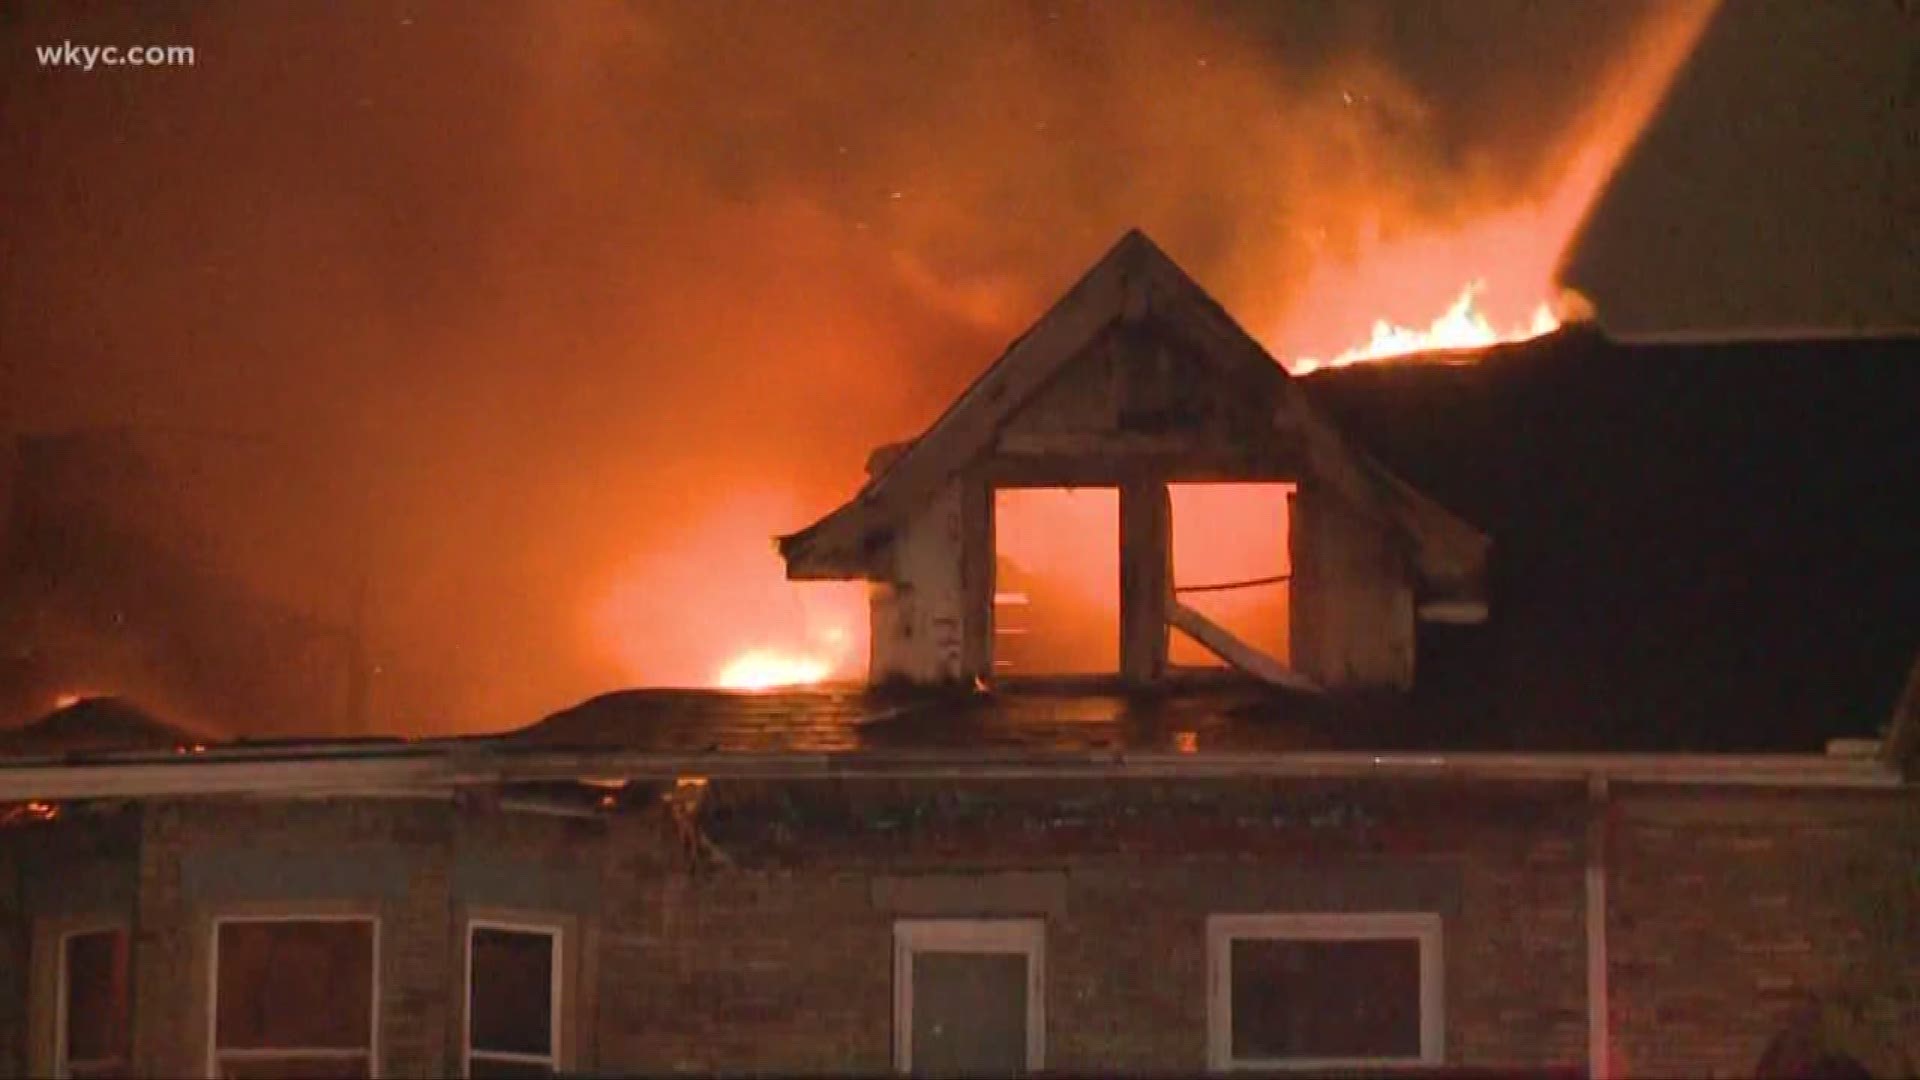 Jan. 23, 2019: At least four people were hurt overnight when part of their apartment complex caught fire in East Cleveland. It started around 10 p.m. Tuesday night on Superior Avenue and Carlyon Road.